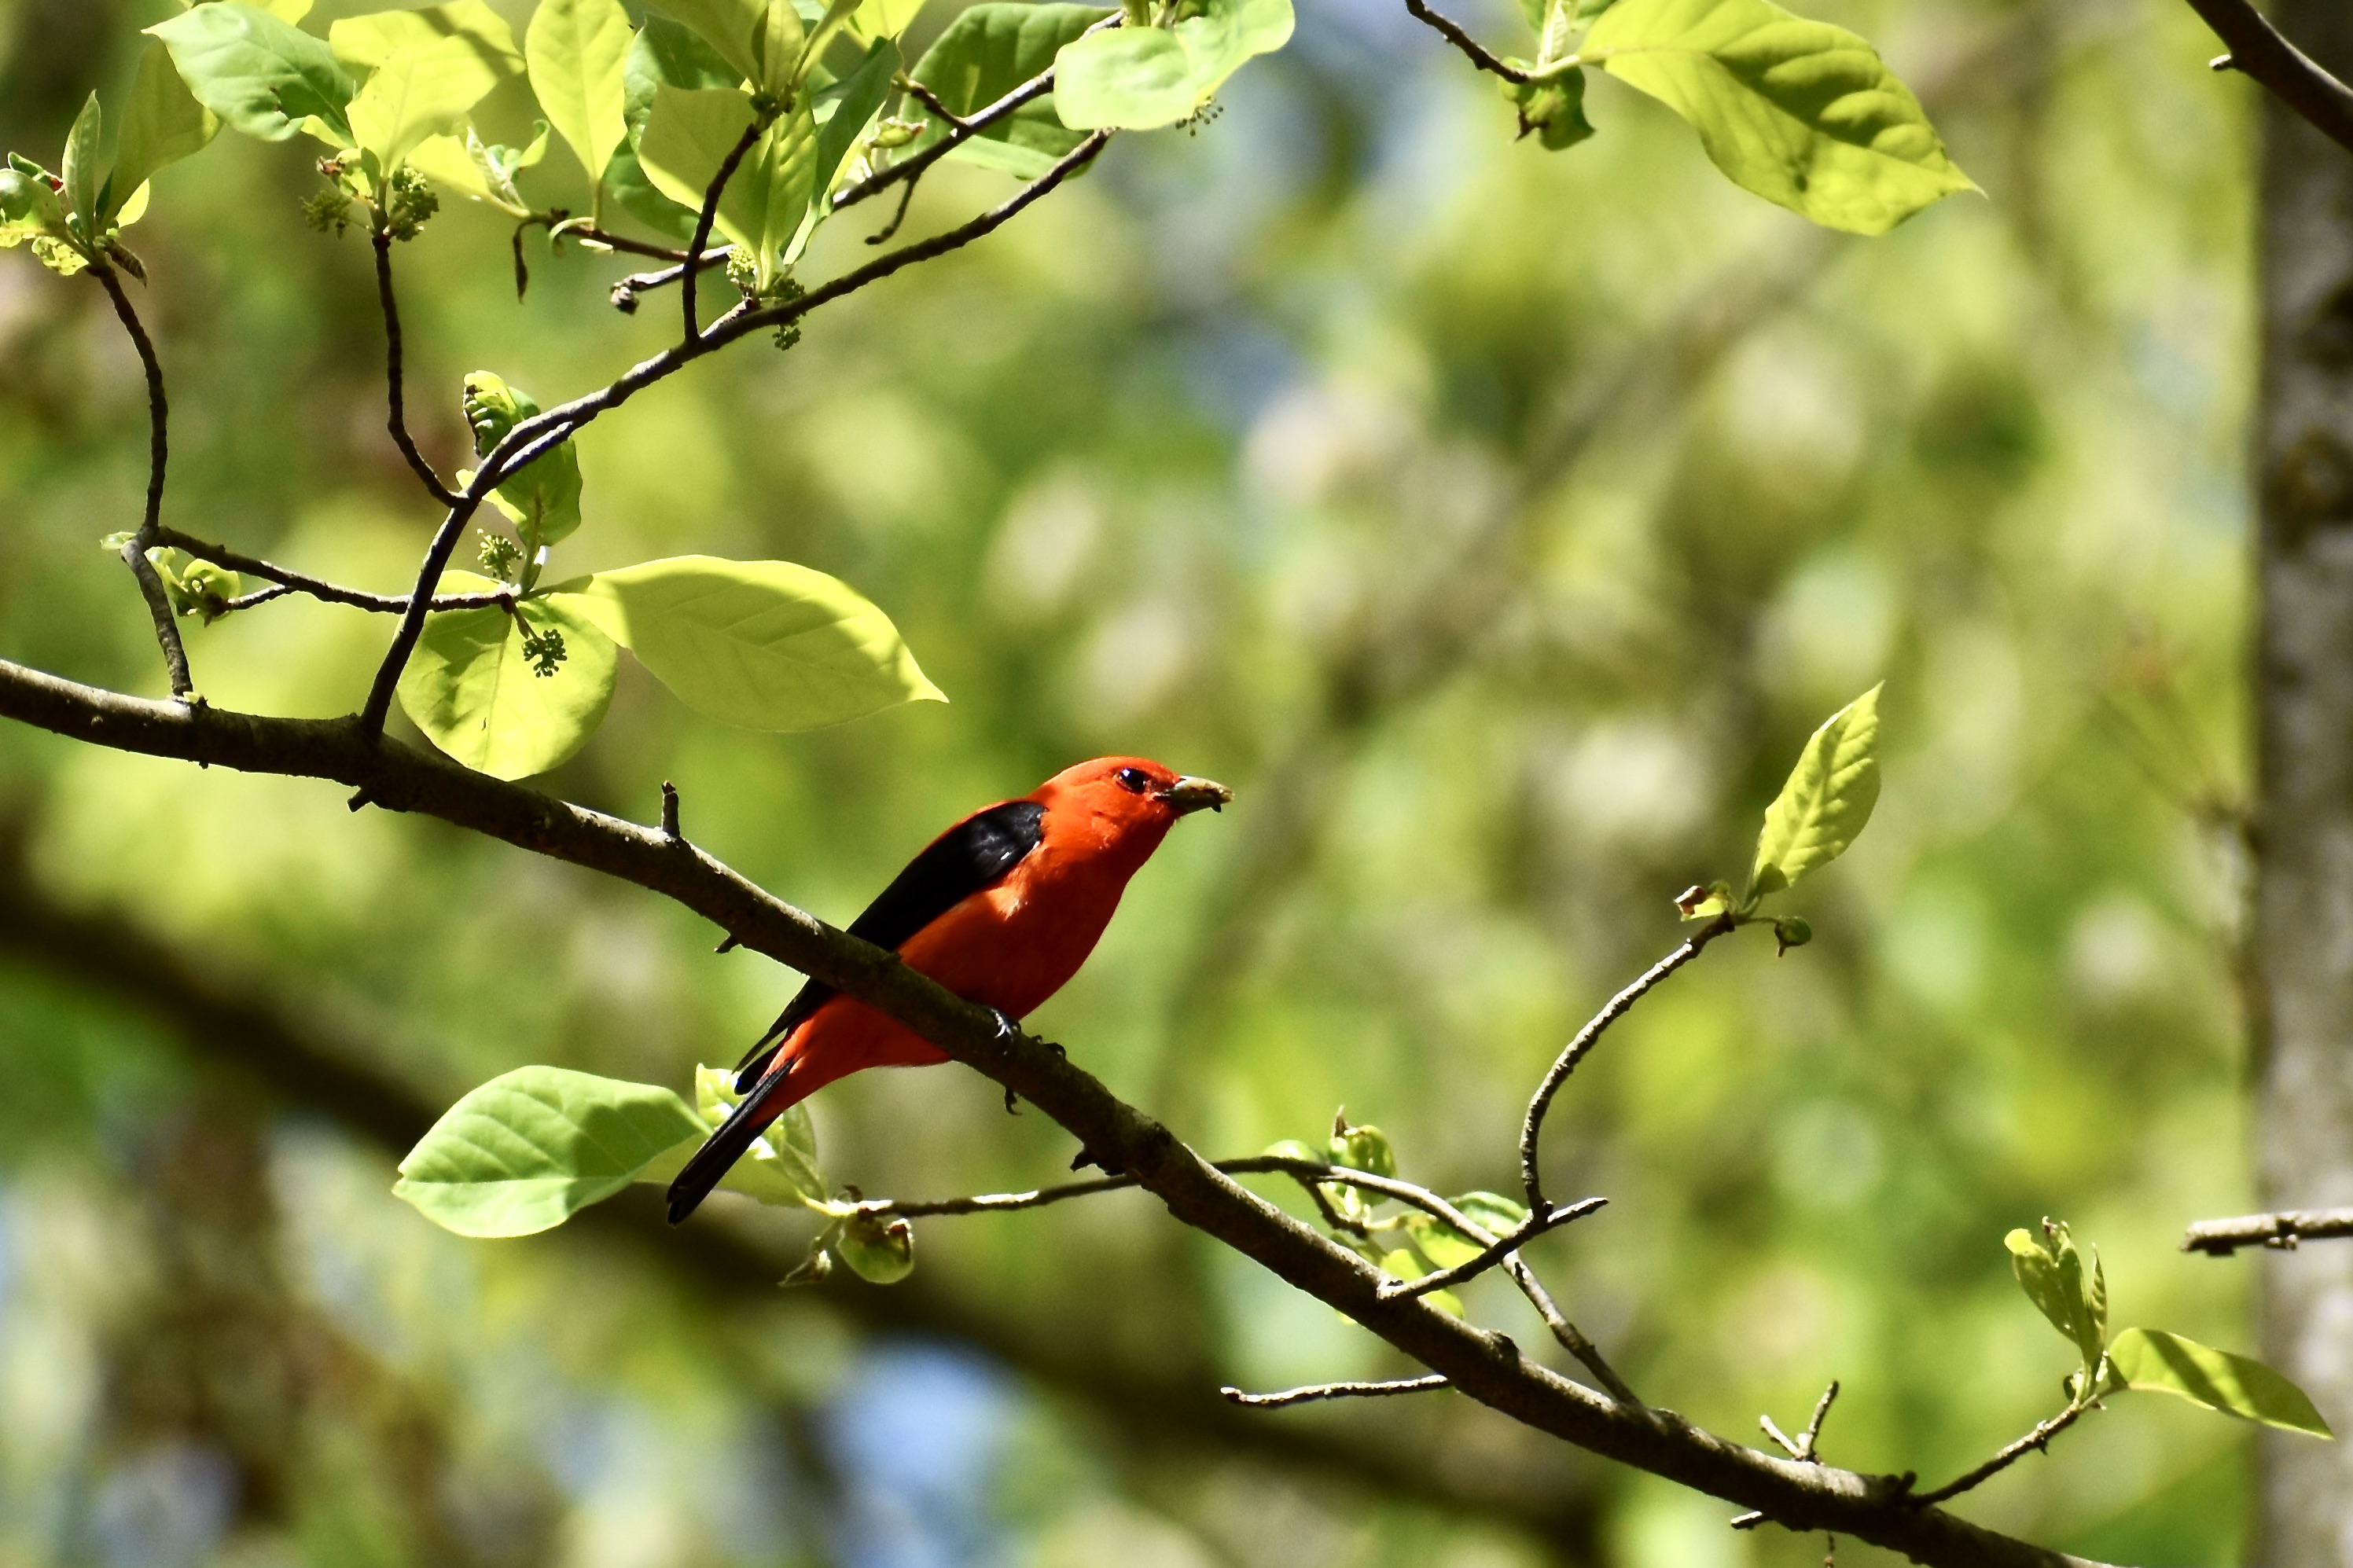 A bright red bird with black wings sits on a branch.